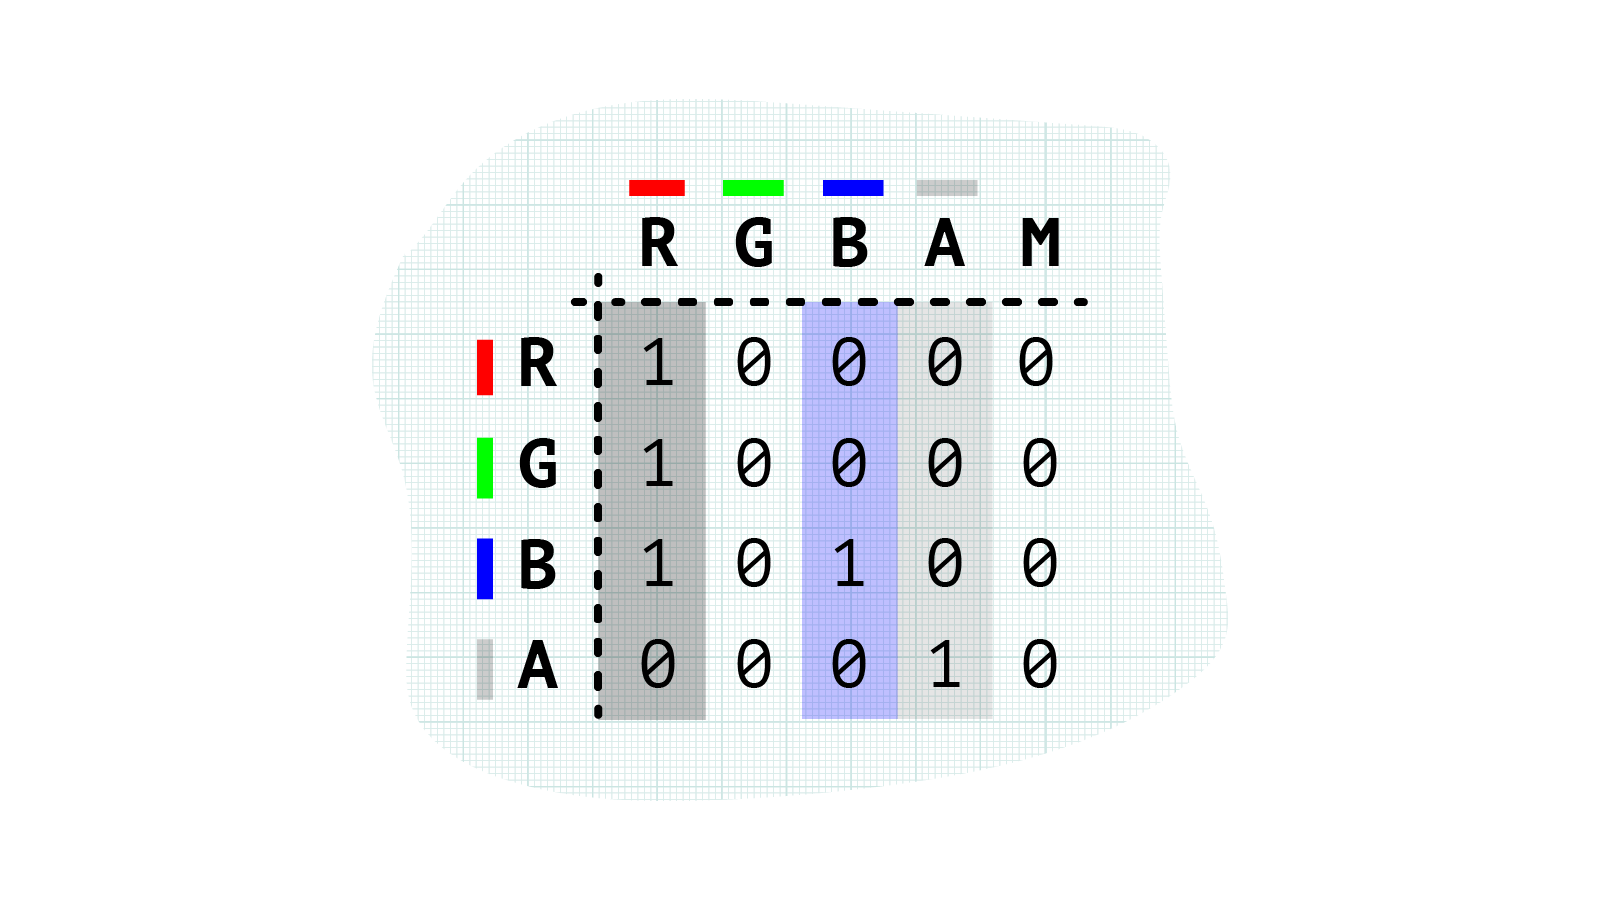 Colour matrix grid with all values in the red channel at 1, and the blue value in the blue channel at 1